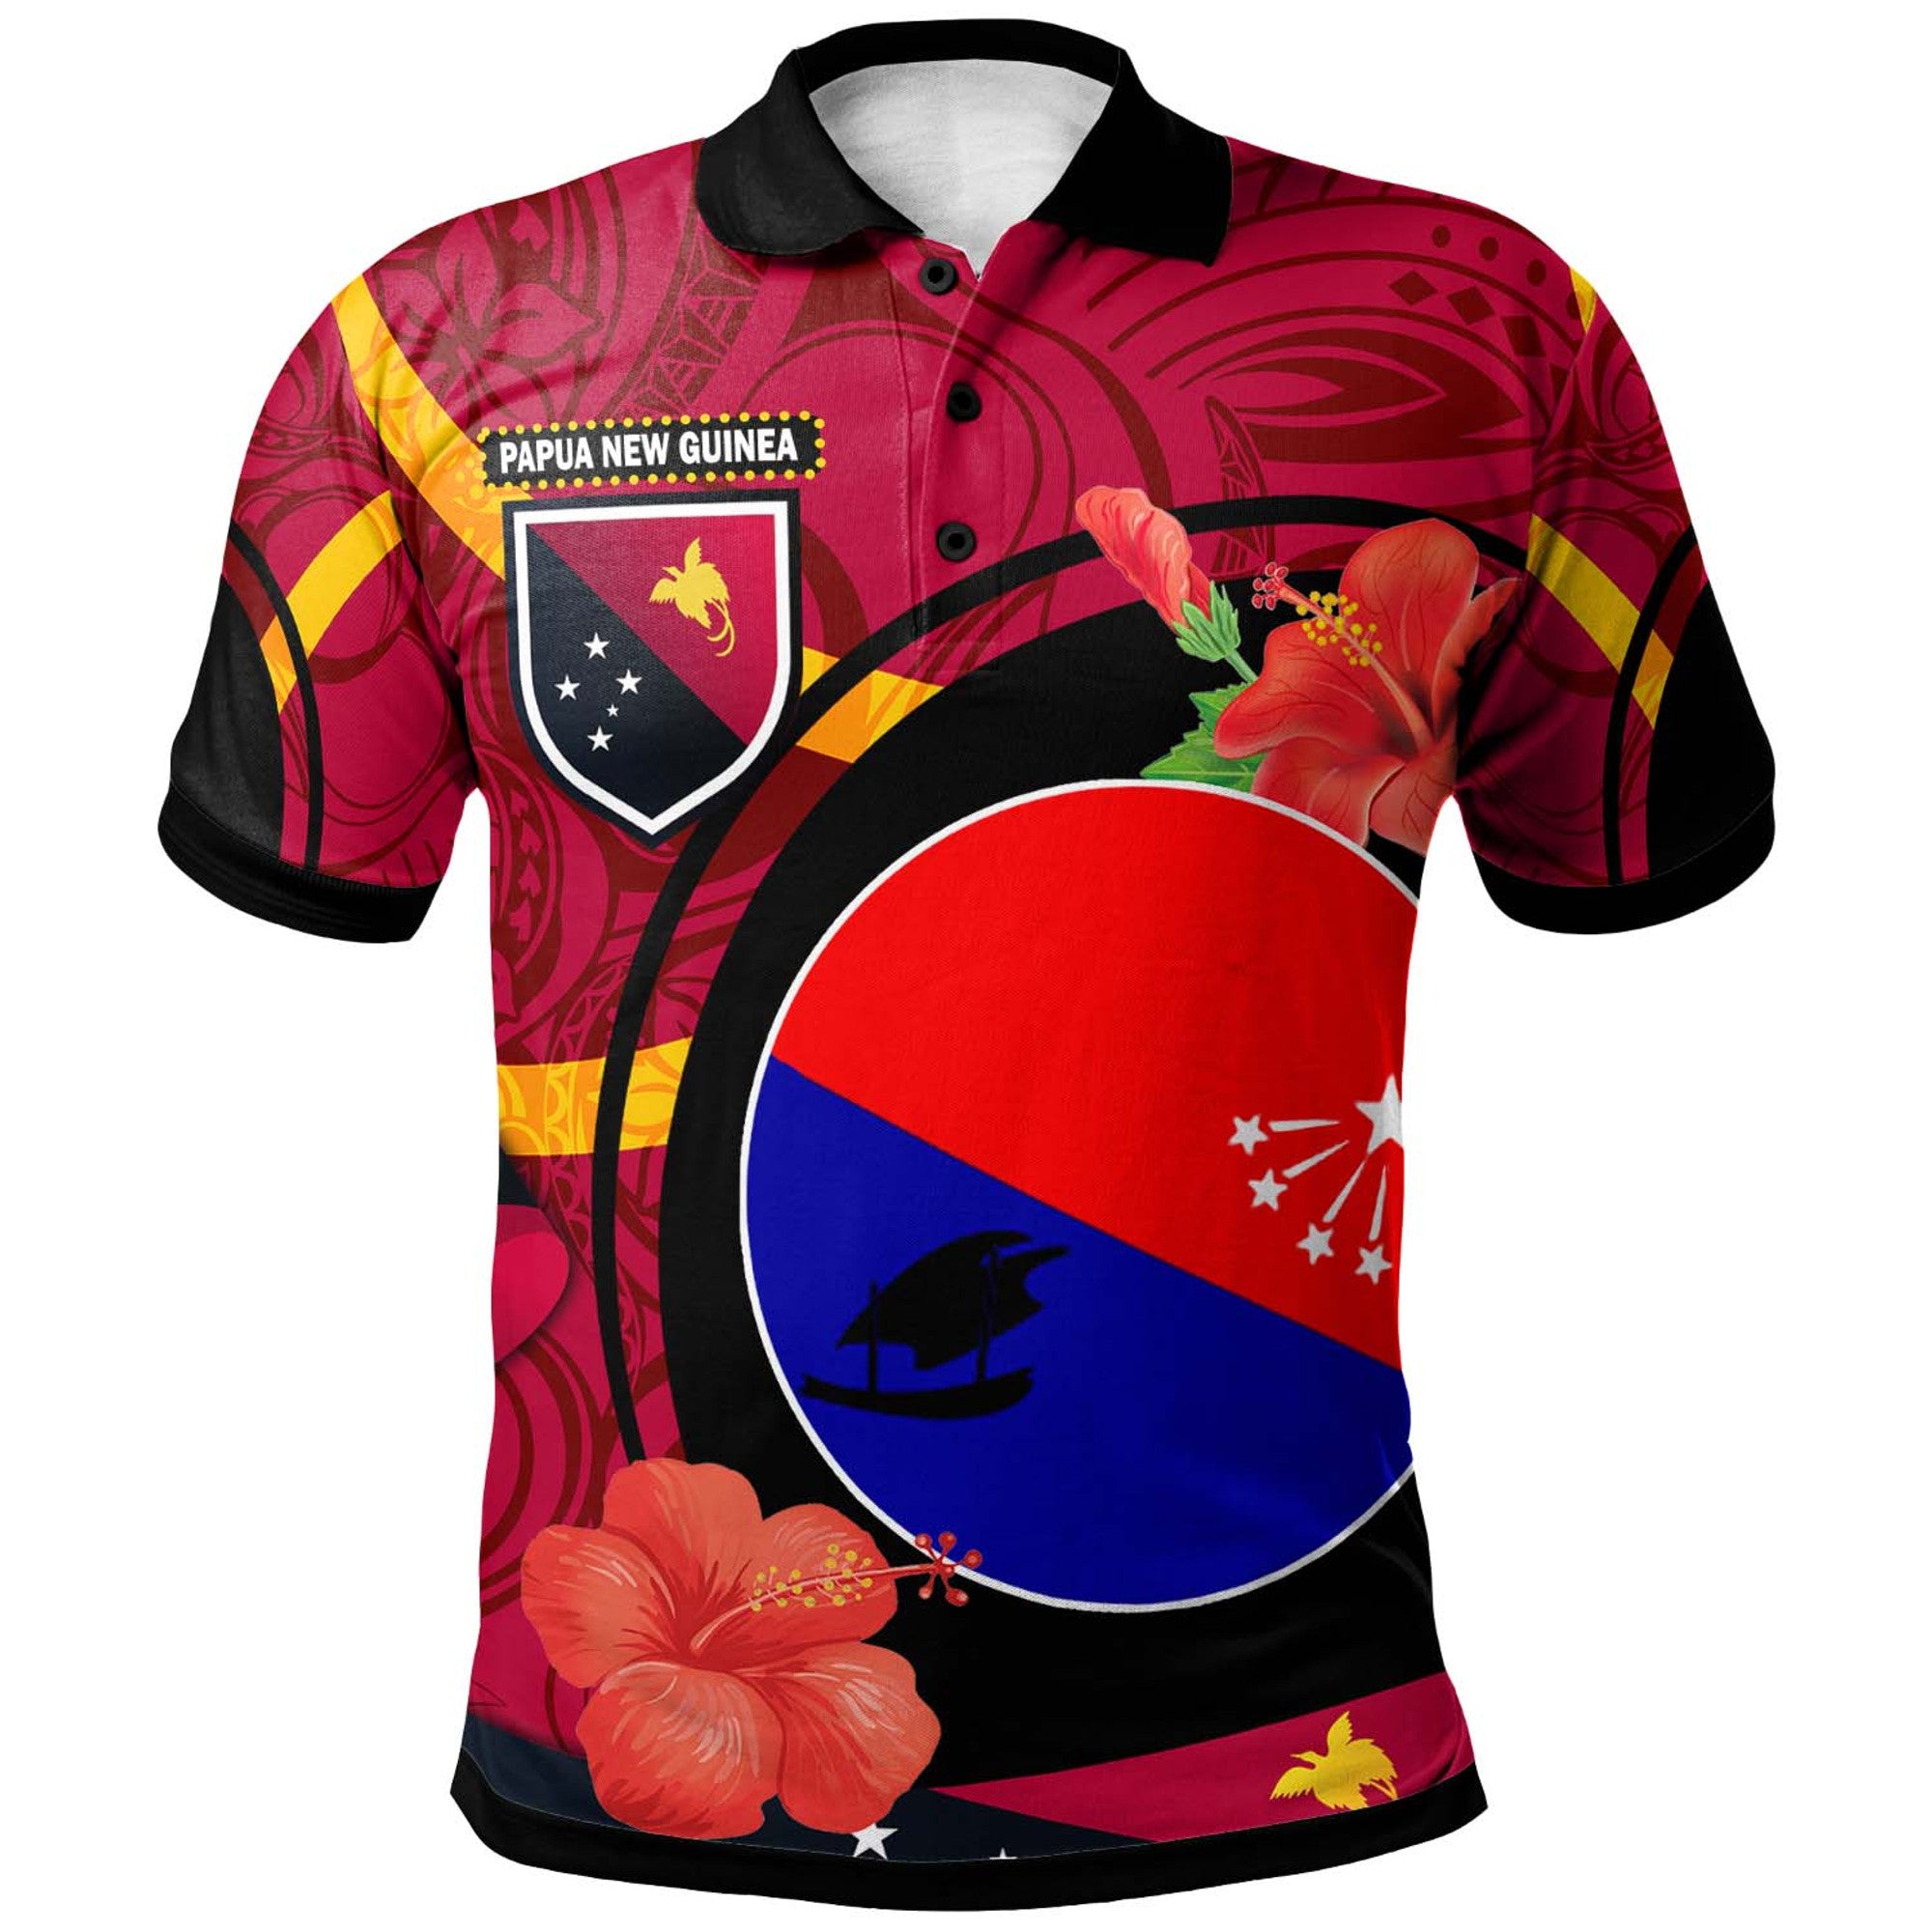 Papua New Guinea Polo Shirt Central Province Flag of PNG with Hibicus and Polynesian Culture Polo Shirt Art - Polynesian Pride